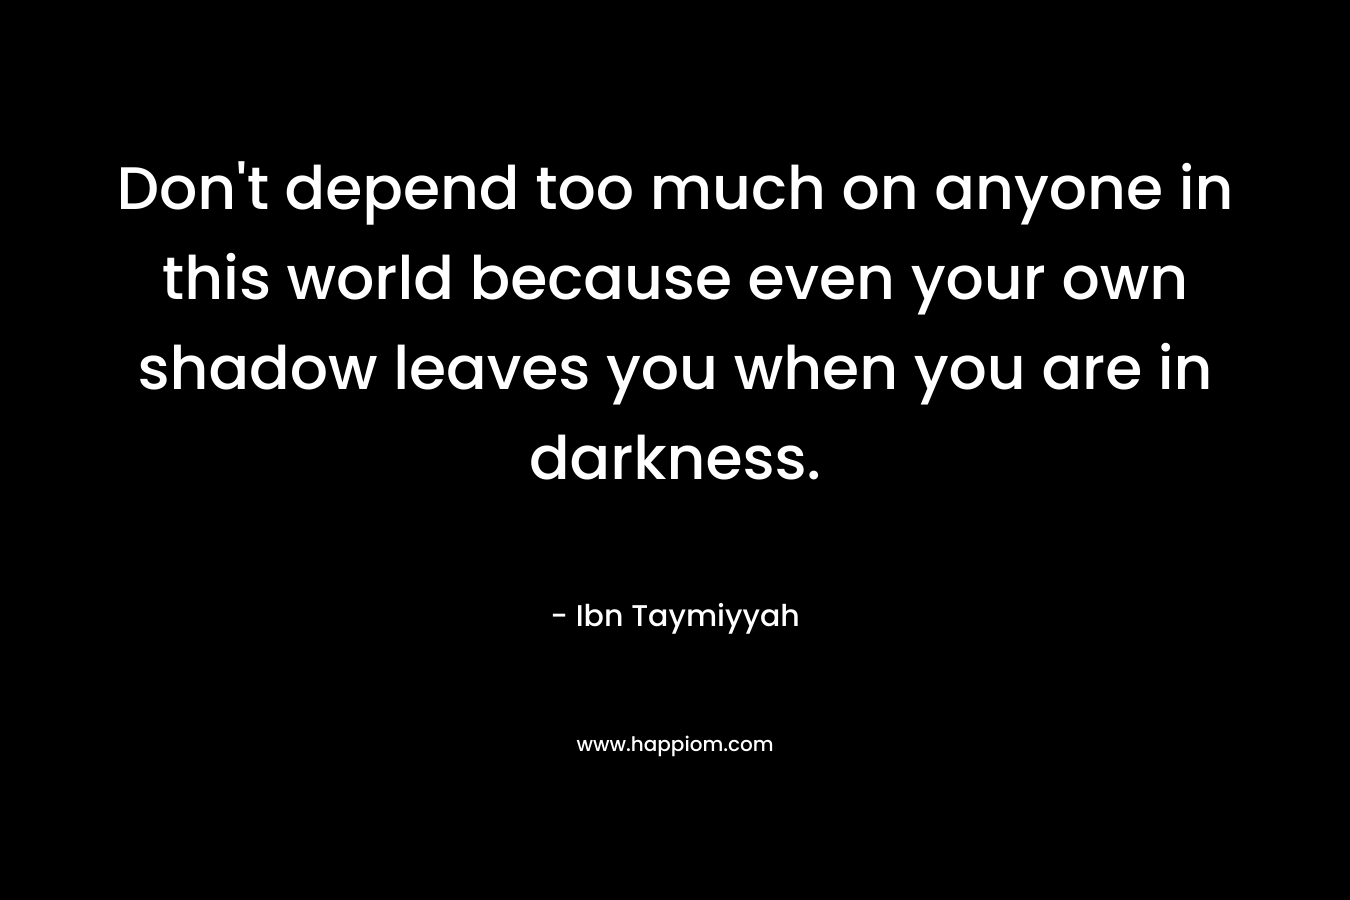 Don’t depend too much on anyone in this world because even your own shadow leaves you when you are in darkness. – Ibn Taymiyyah